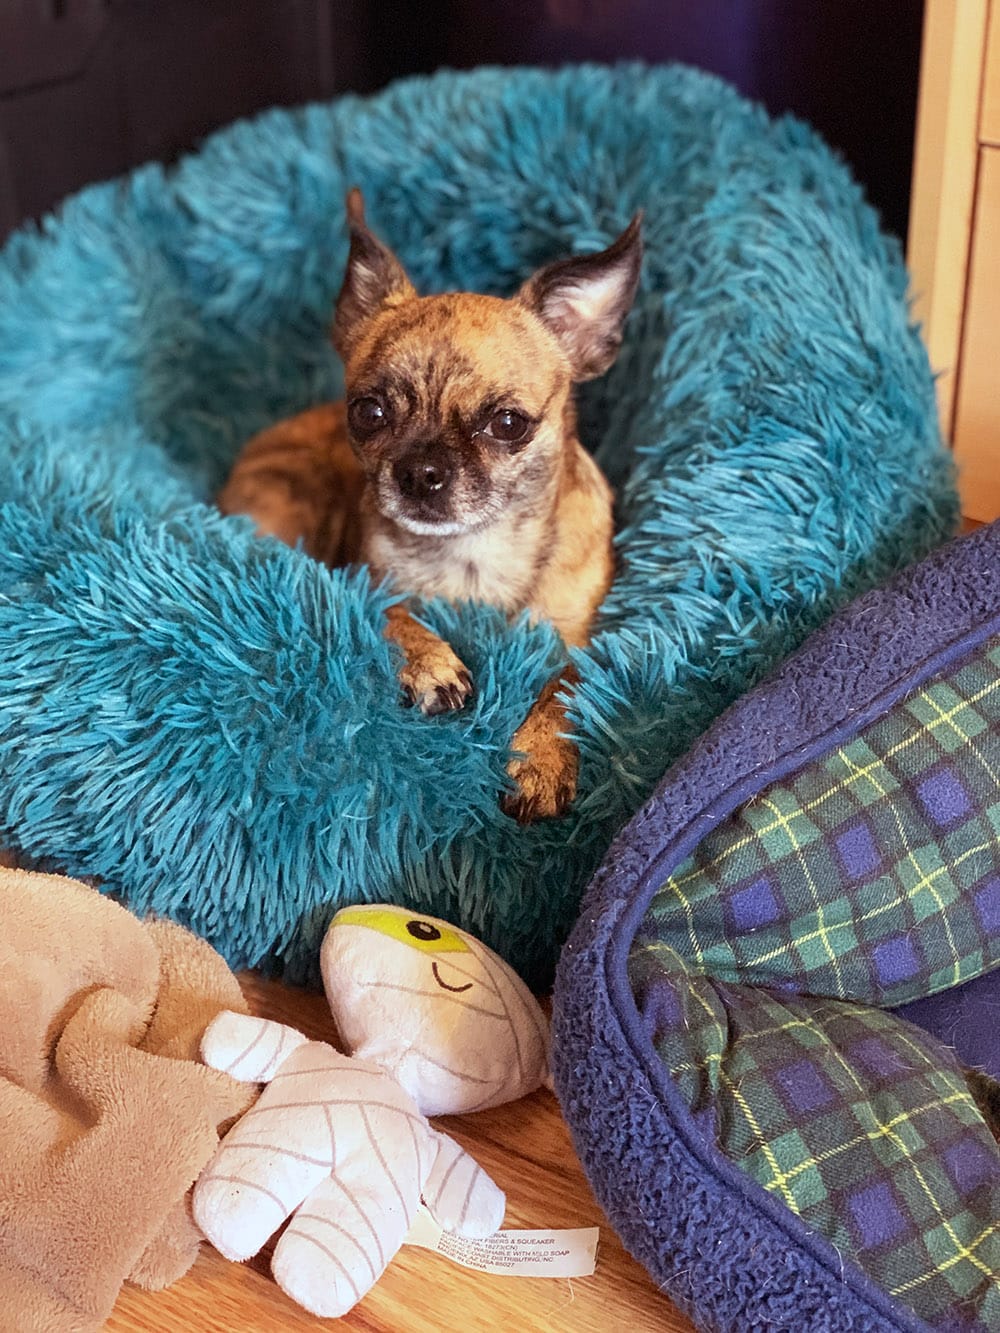 Tiny dog in pet bed.